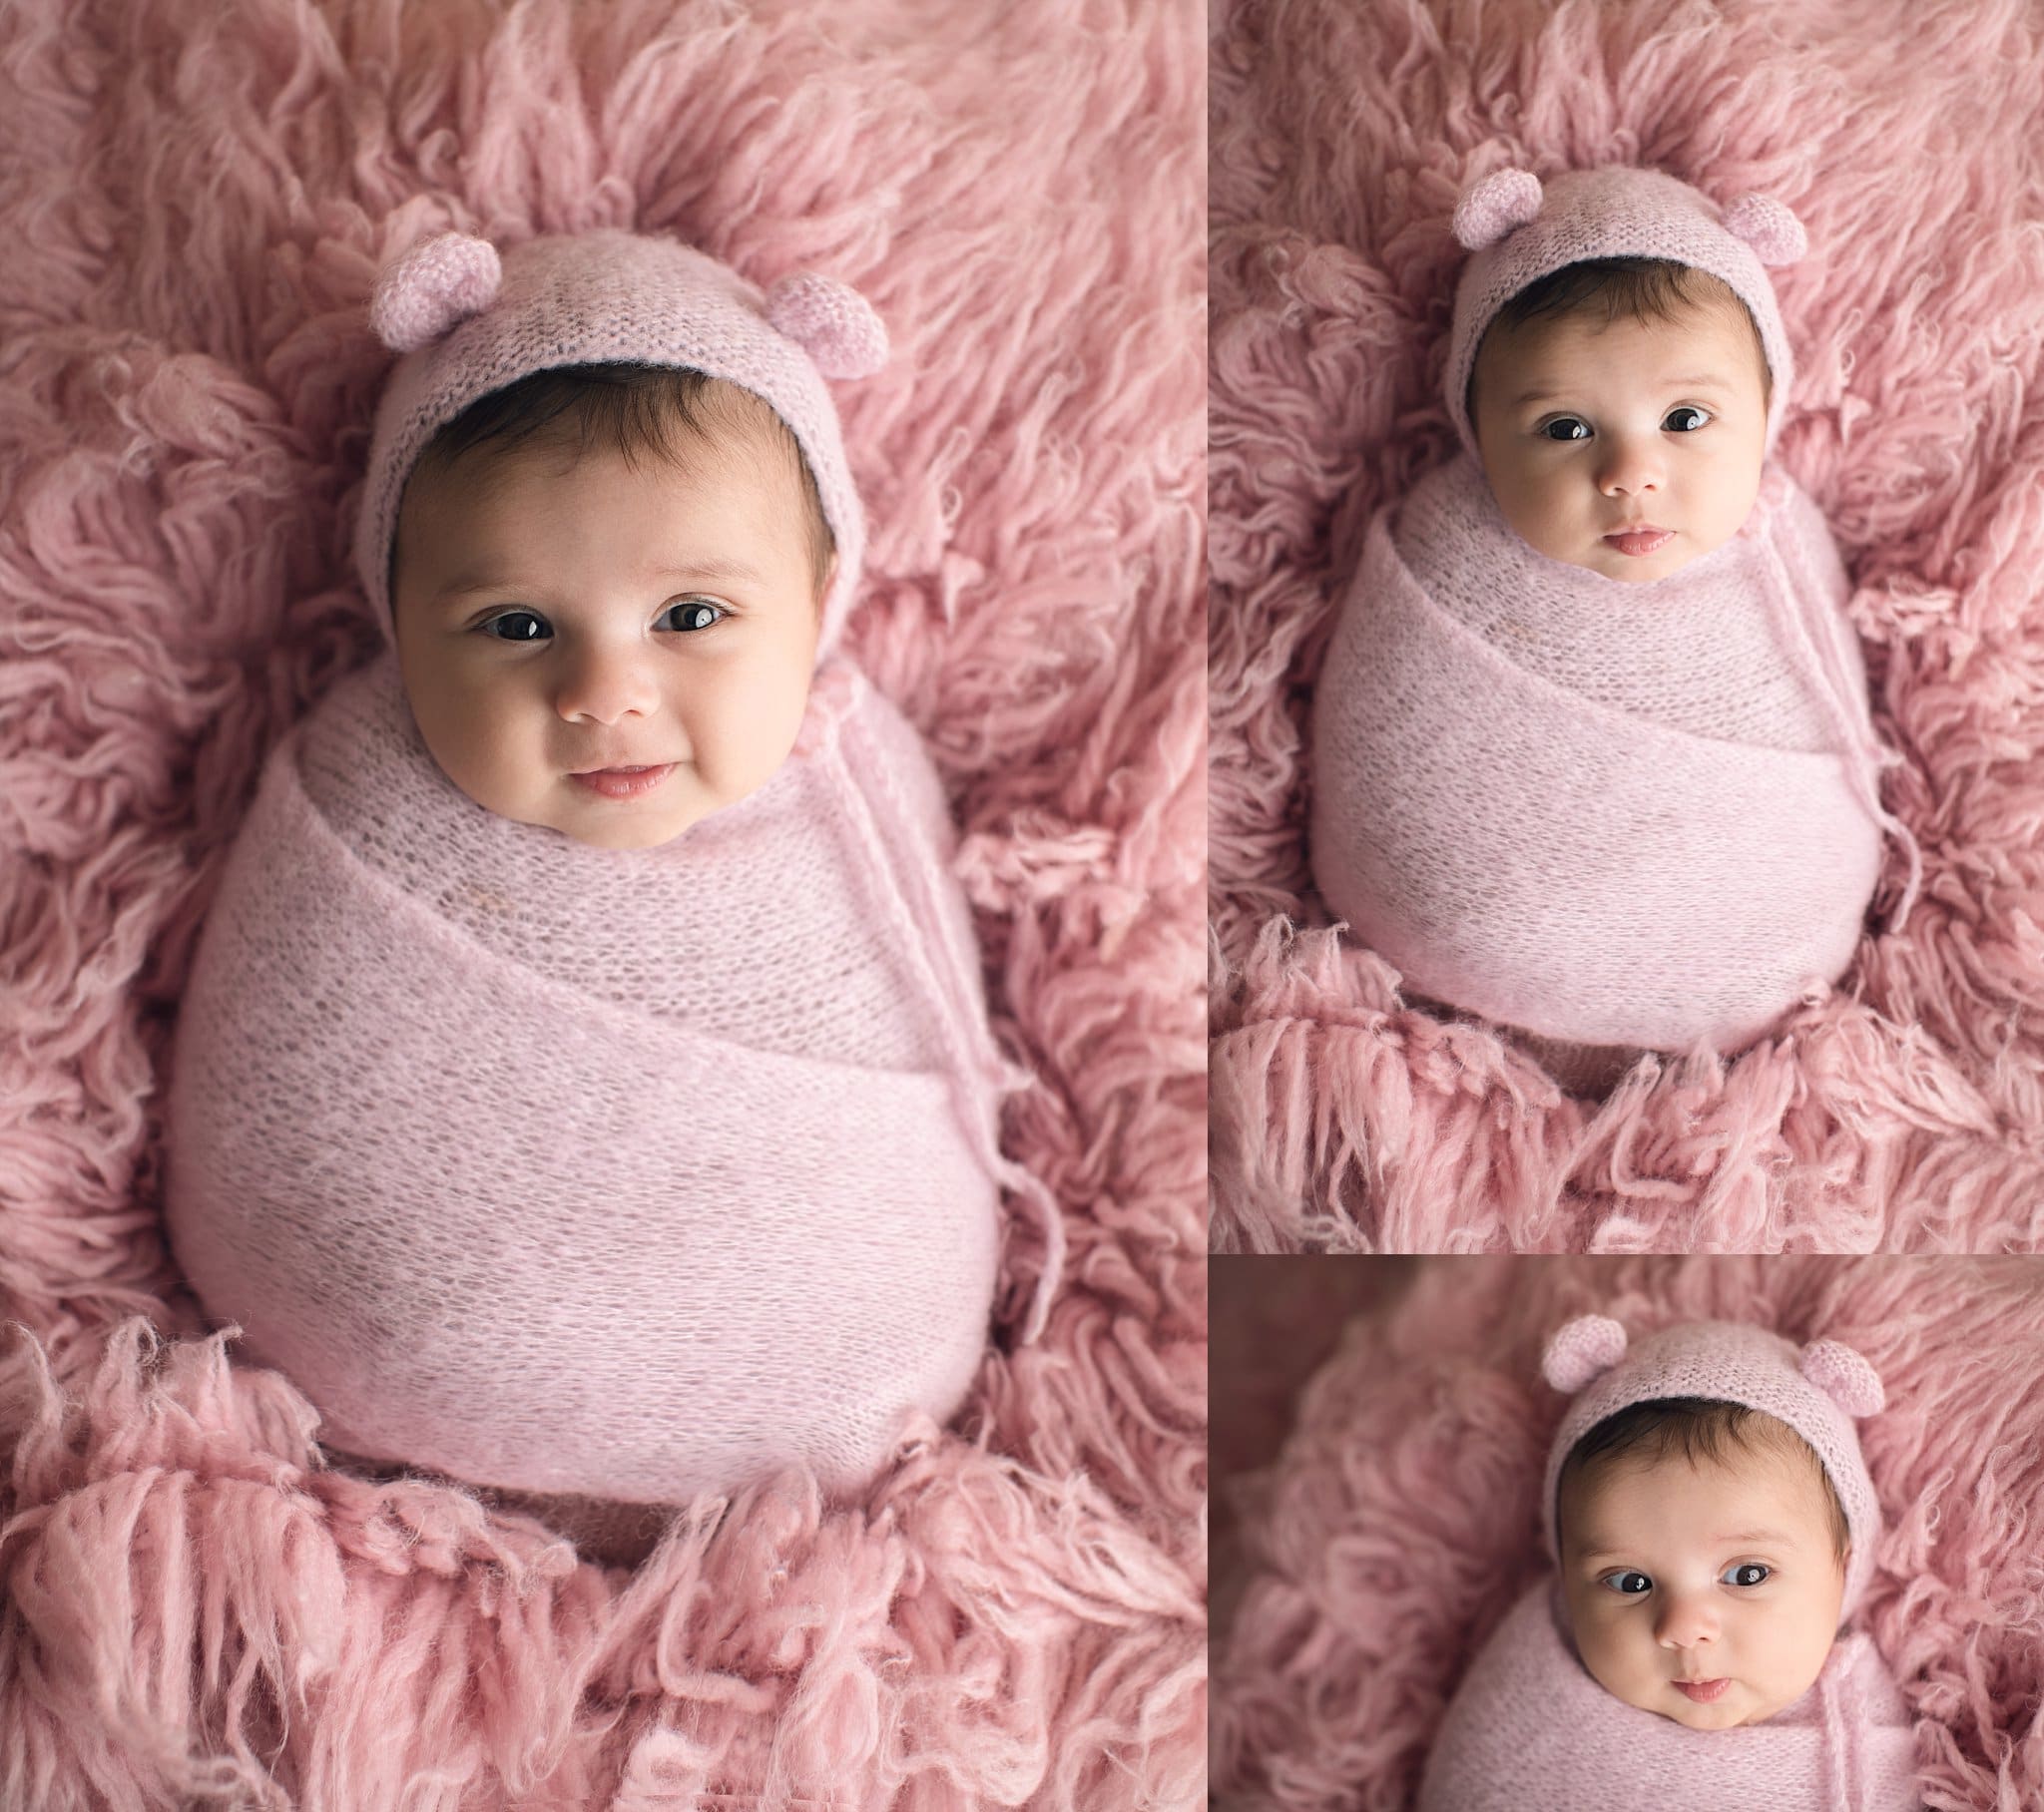 2 month old baby girl swaddled in pink on pink fur with pink teddy bear bonnet.